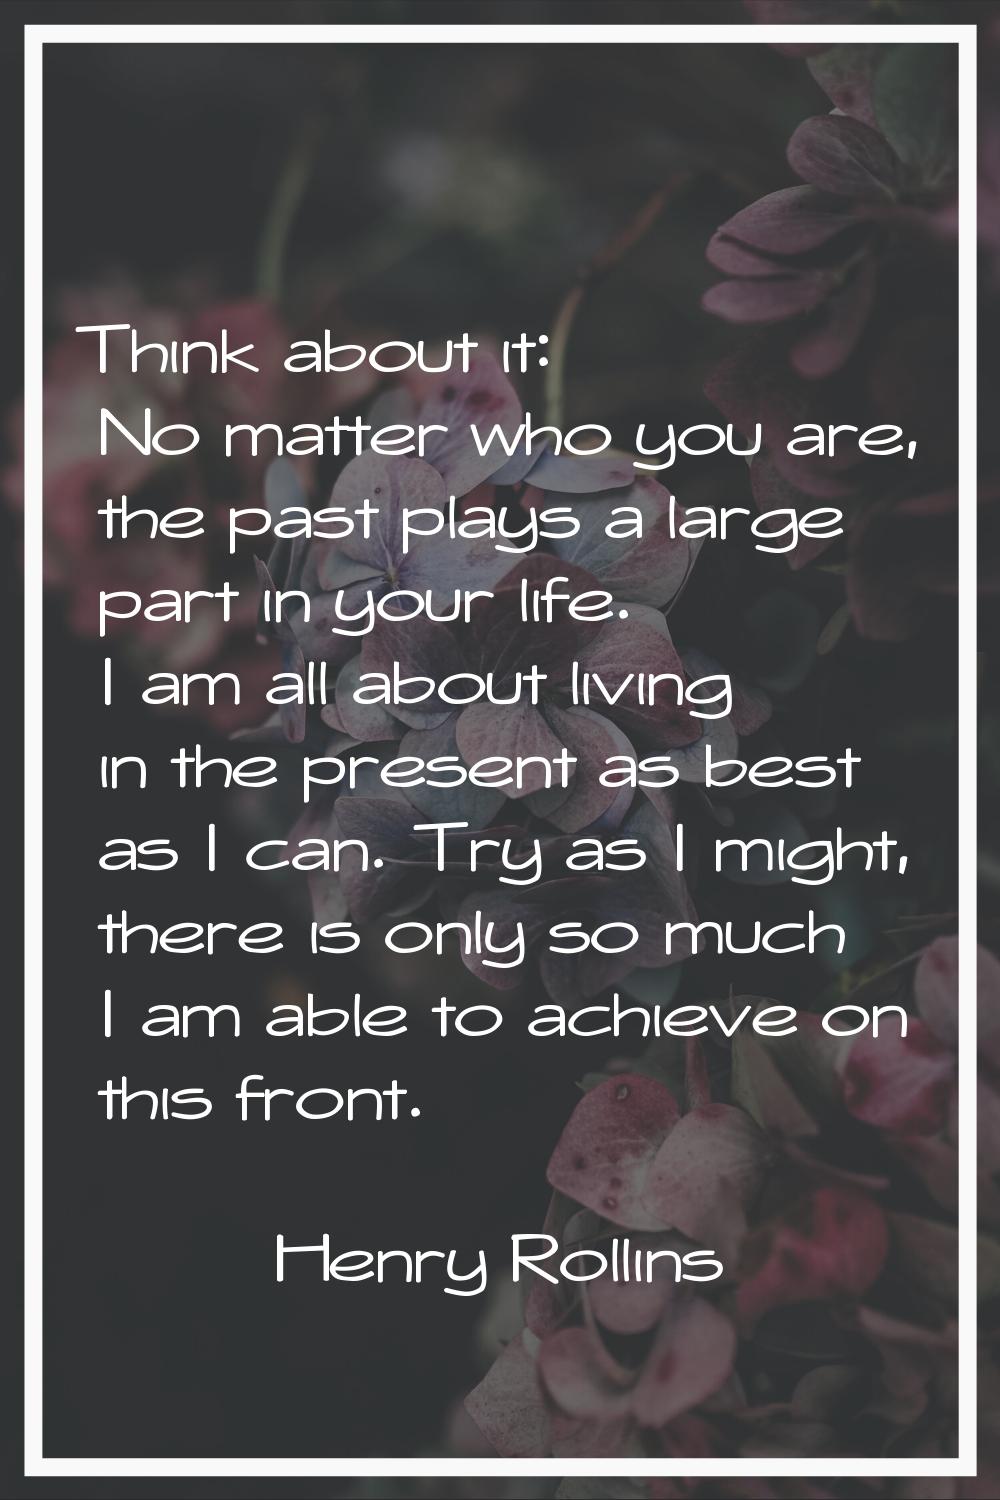 Think about it: No matter who you are, the past plays a large part in your life. I am all about liv